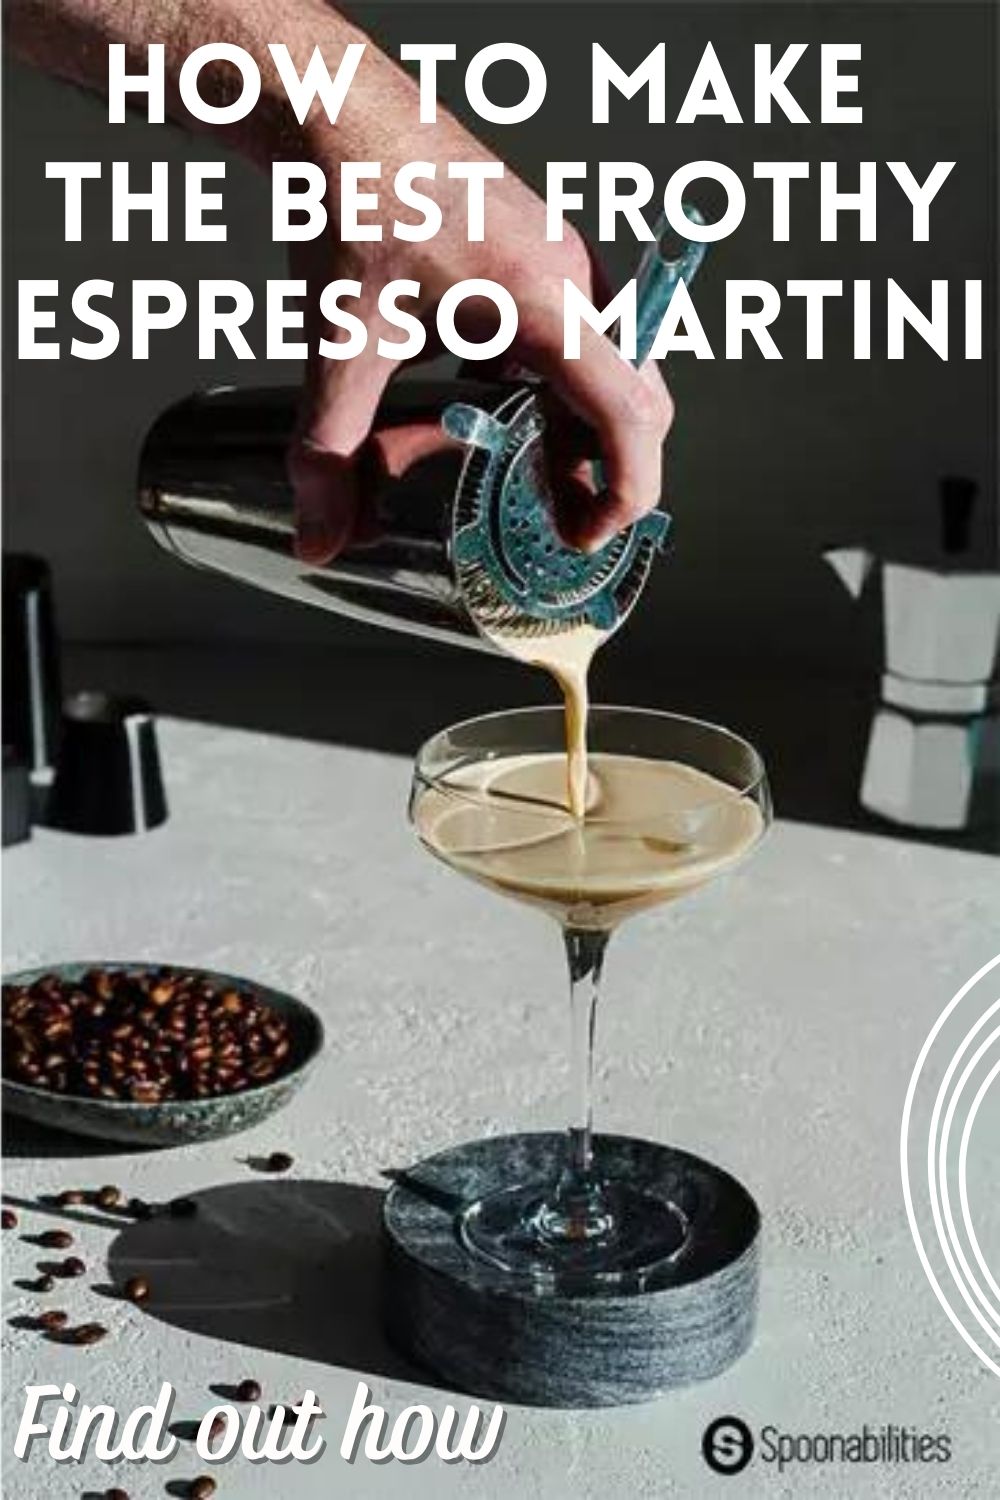 How to Make the Best Frothy Espresso Martini